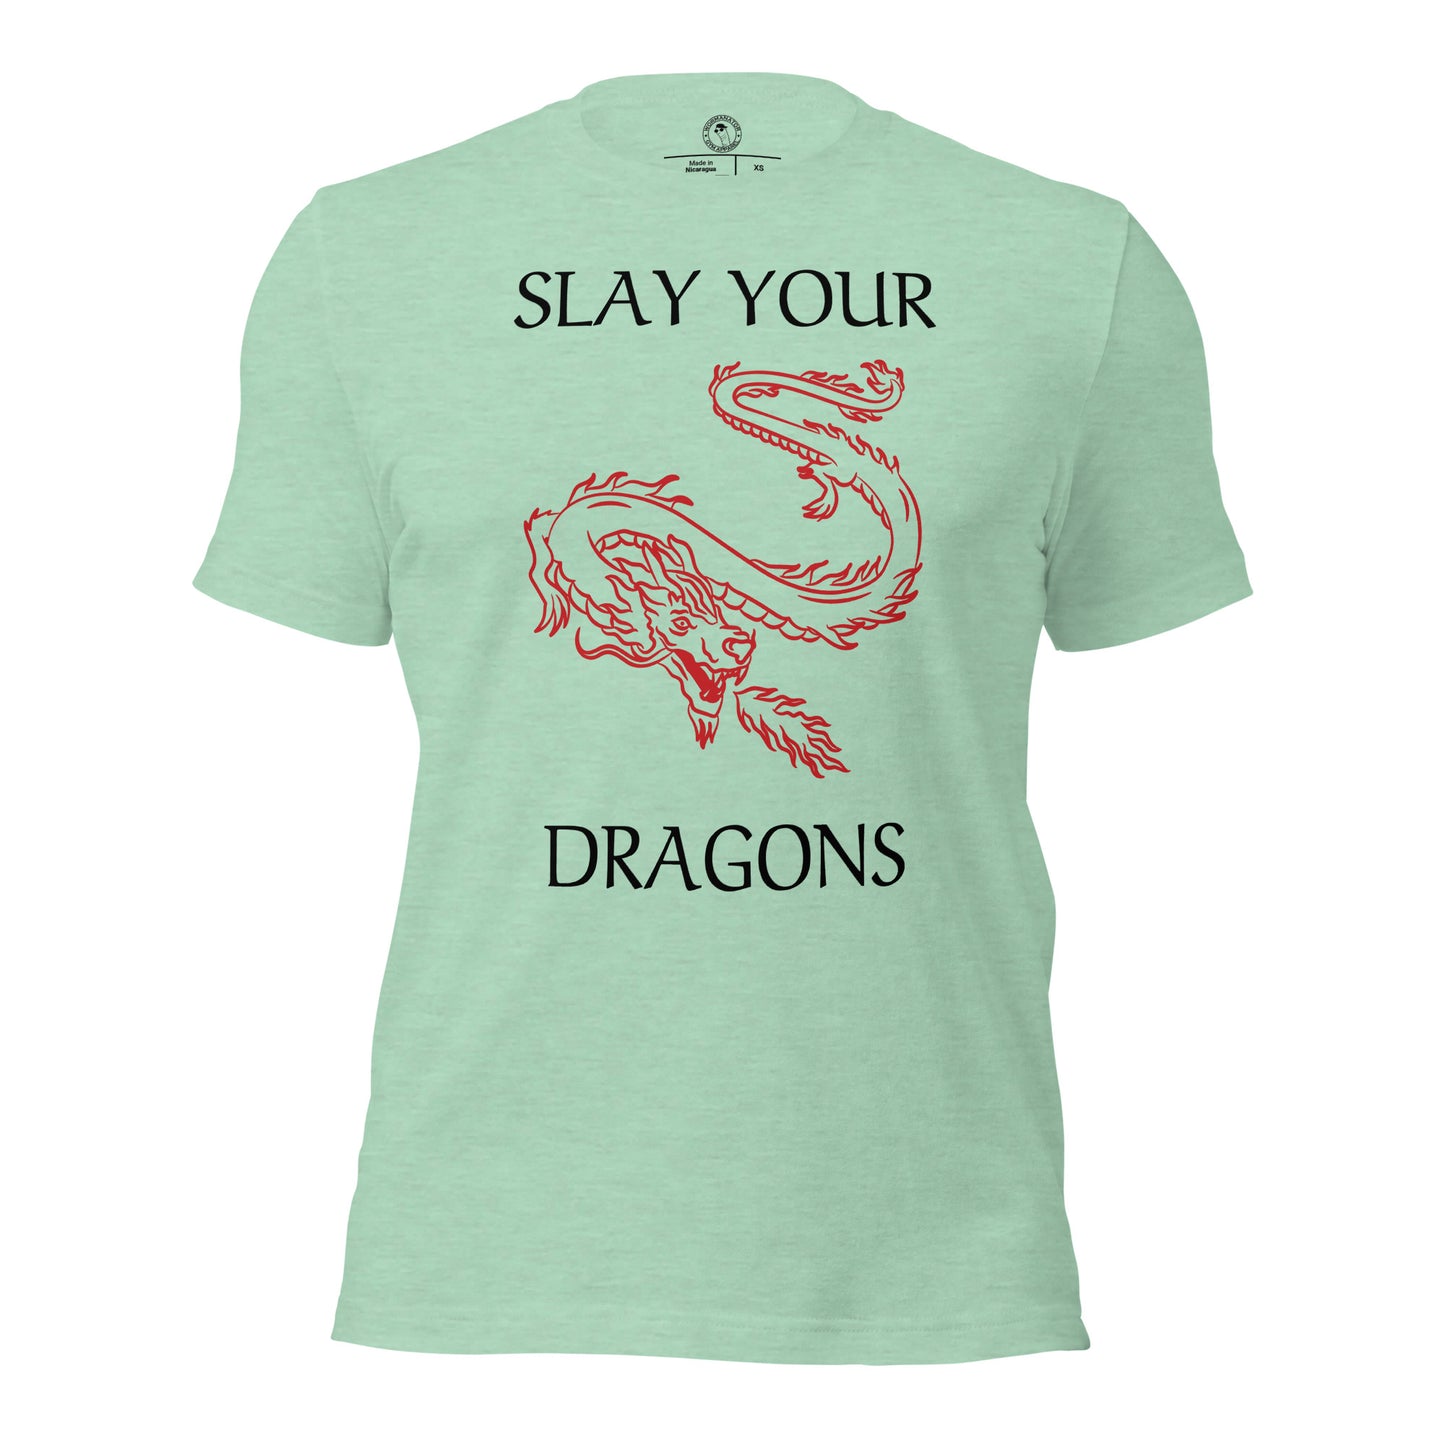 Slay Your Dragons Shirt in Heather Prism Mint